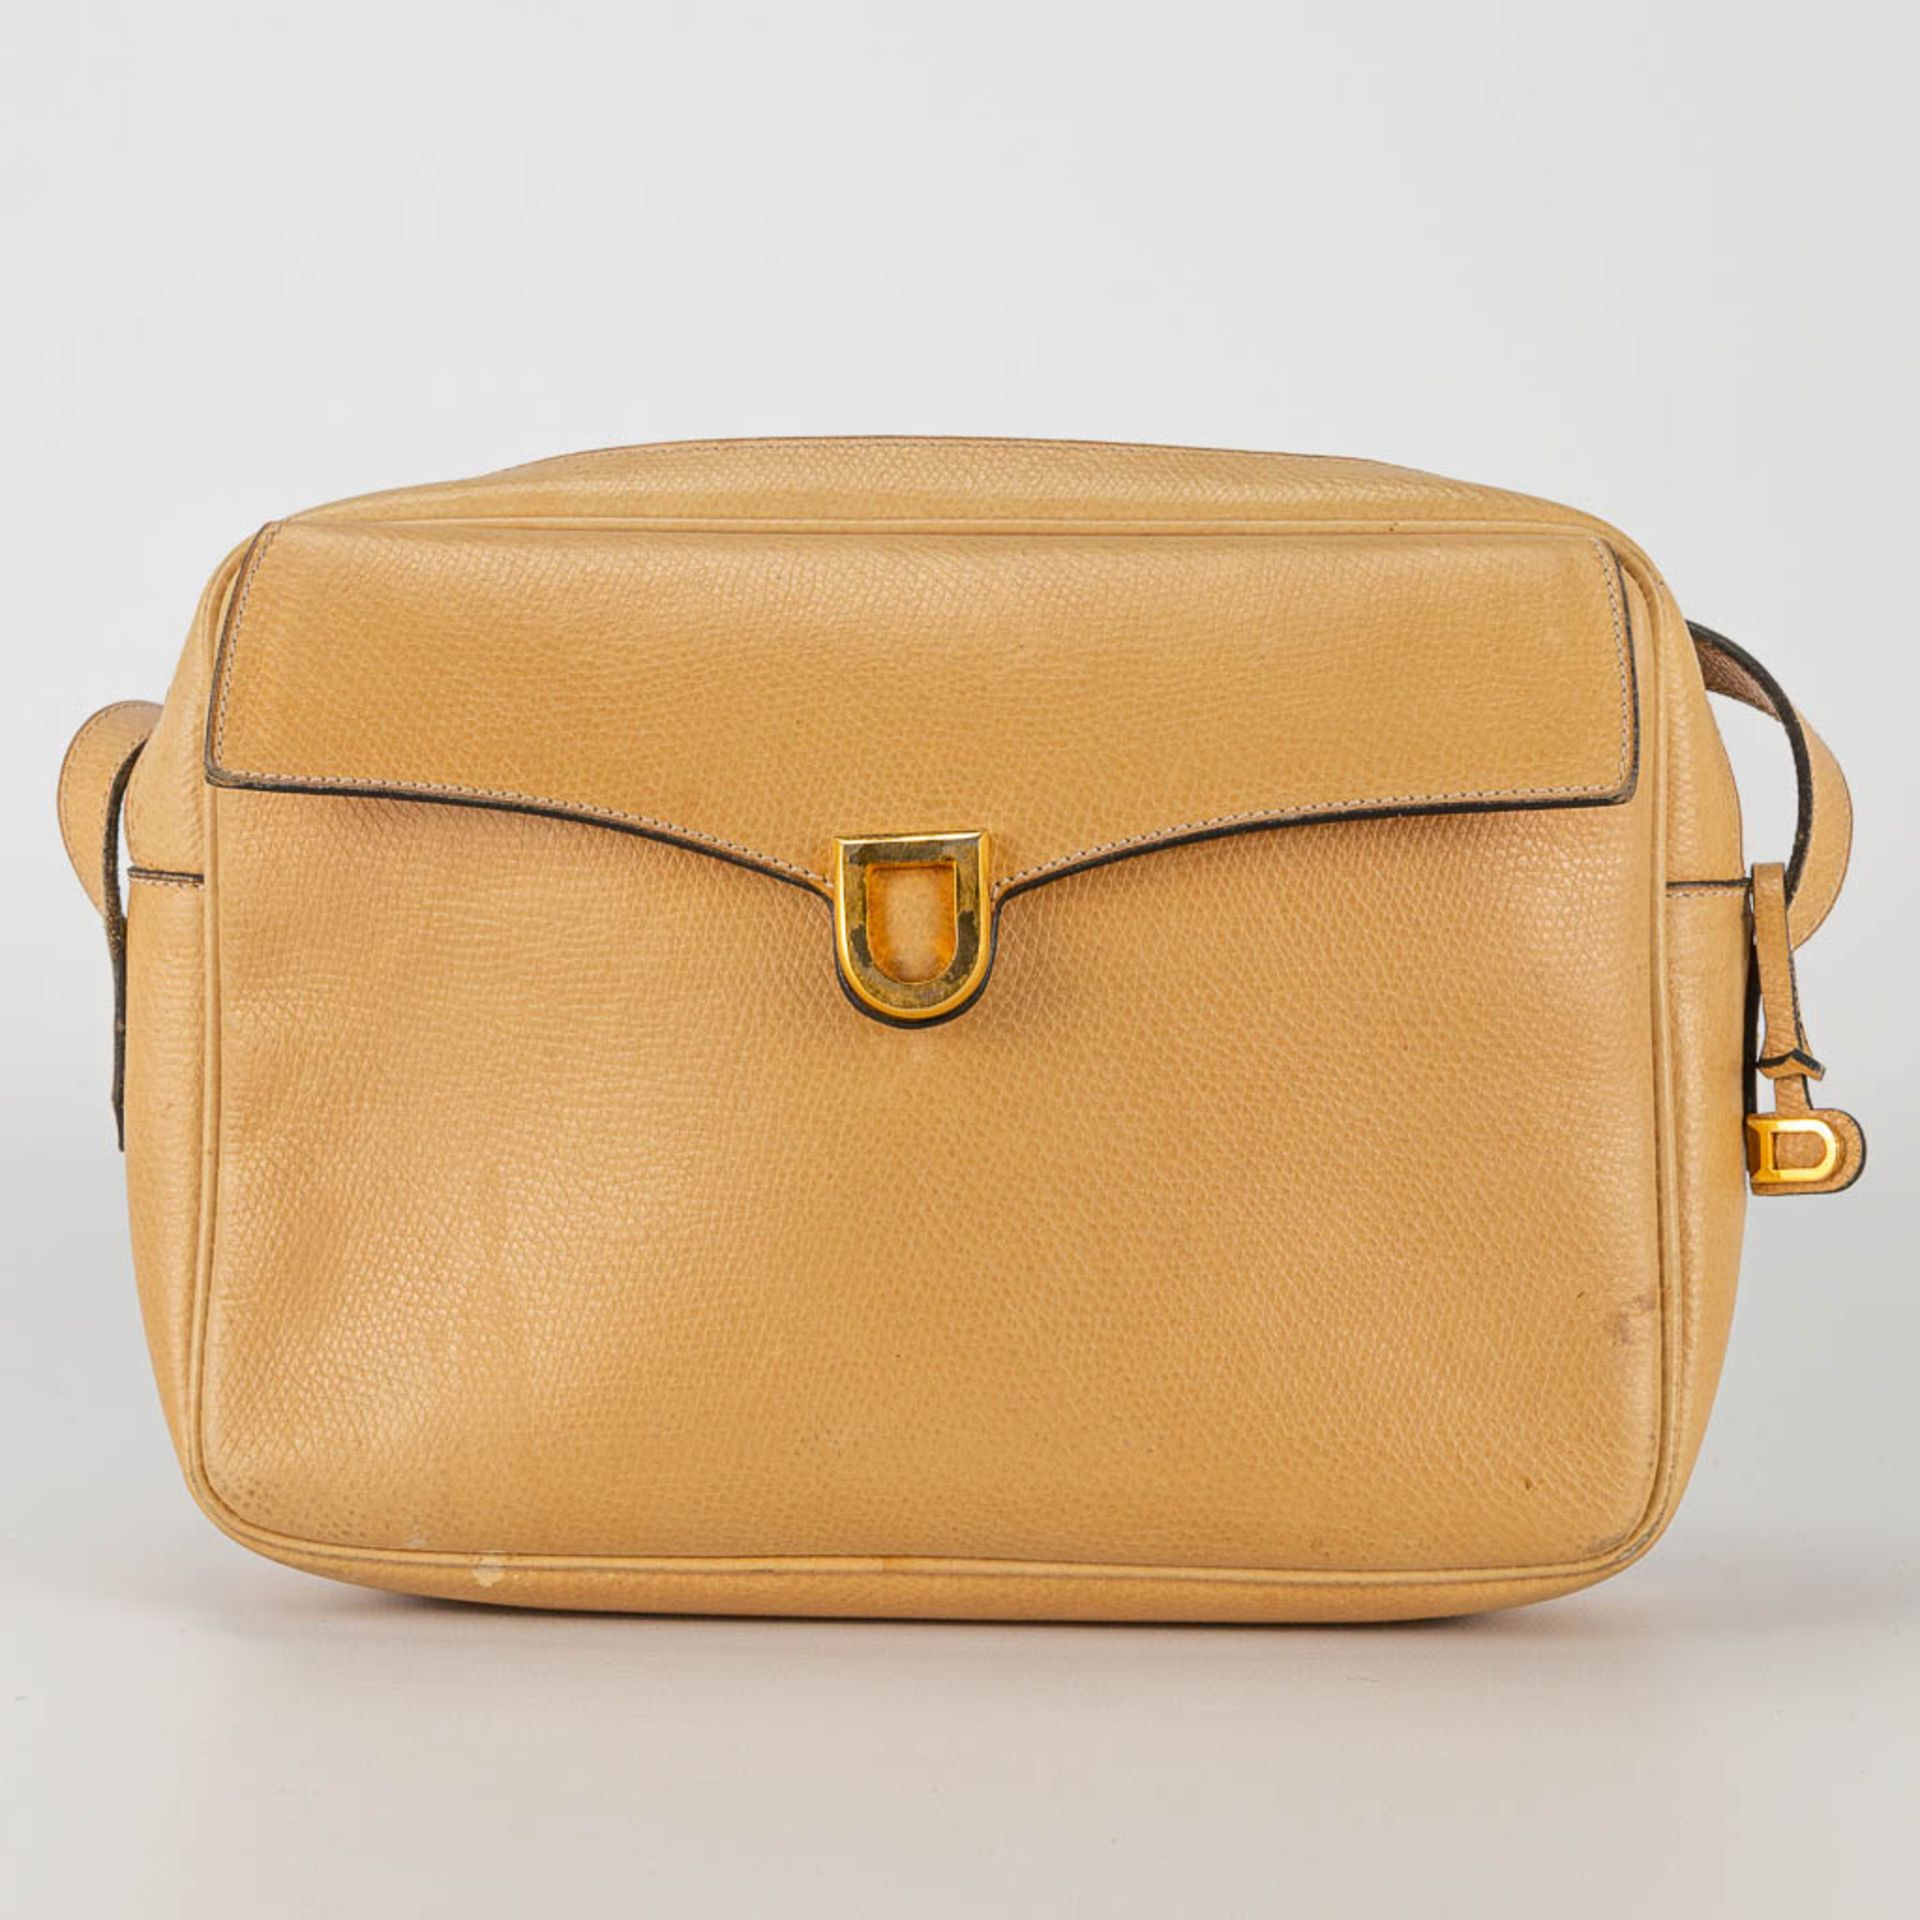 A purse made of brown leather and marked Delvaux. - Image 2 of 14